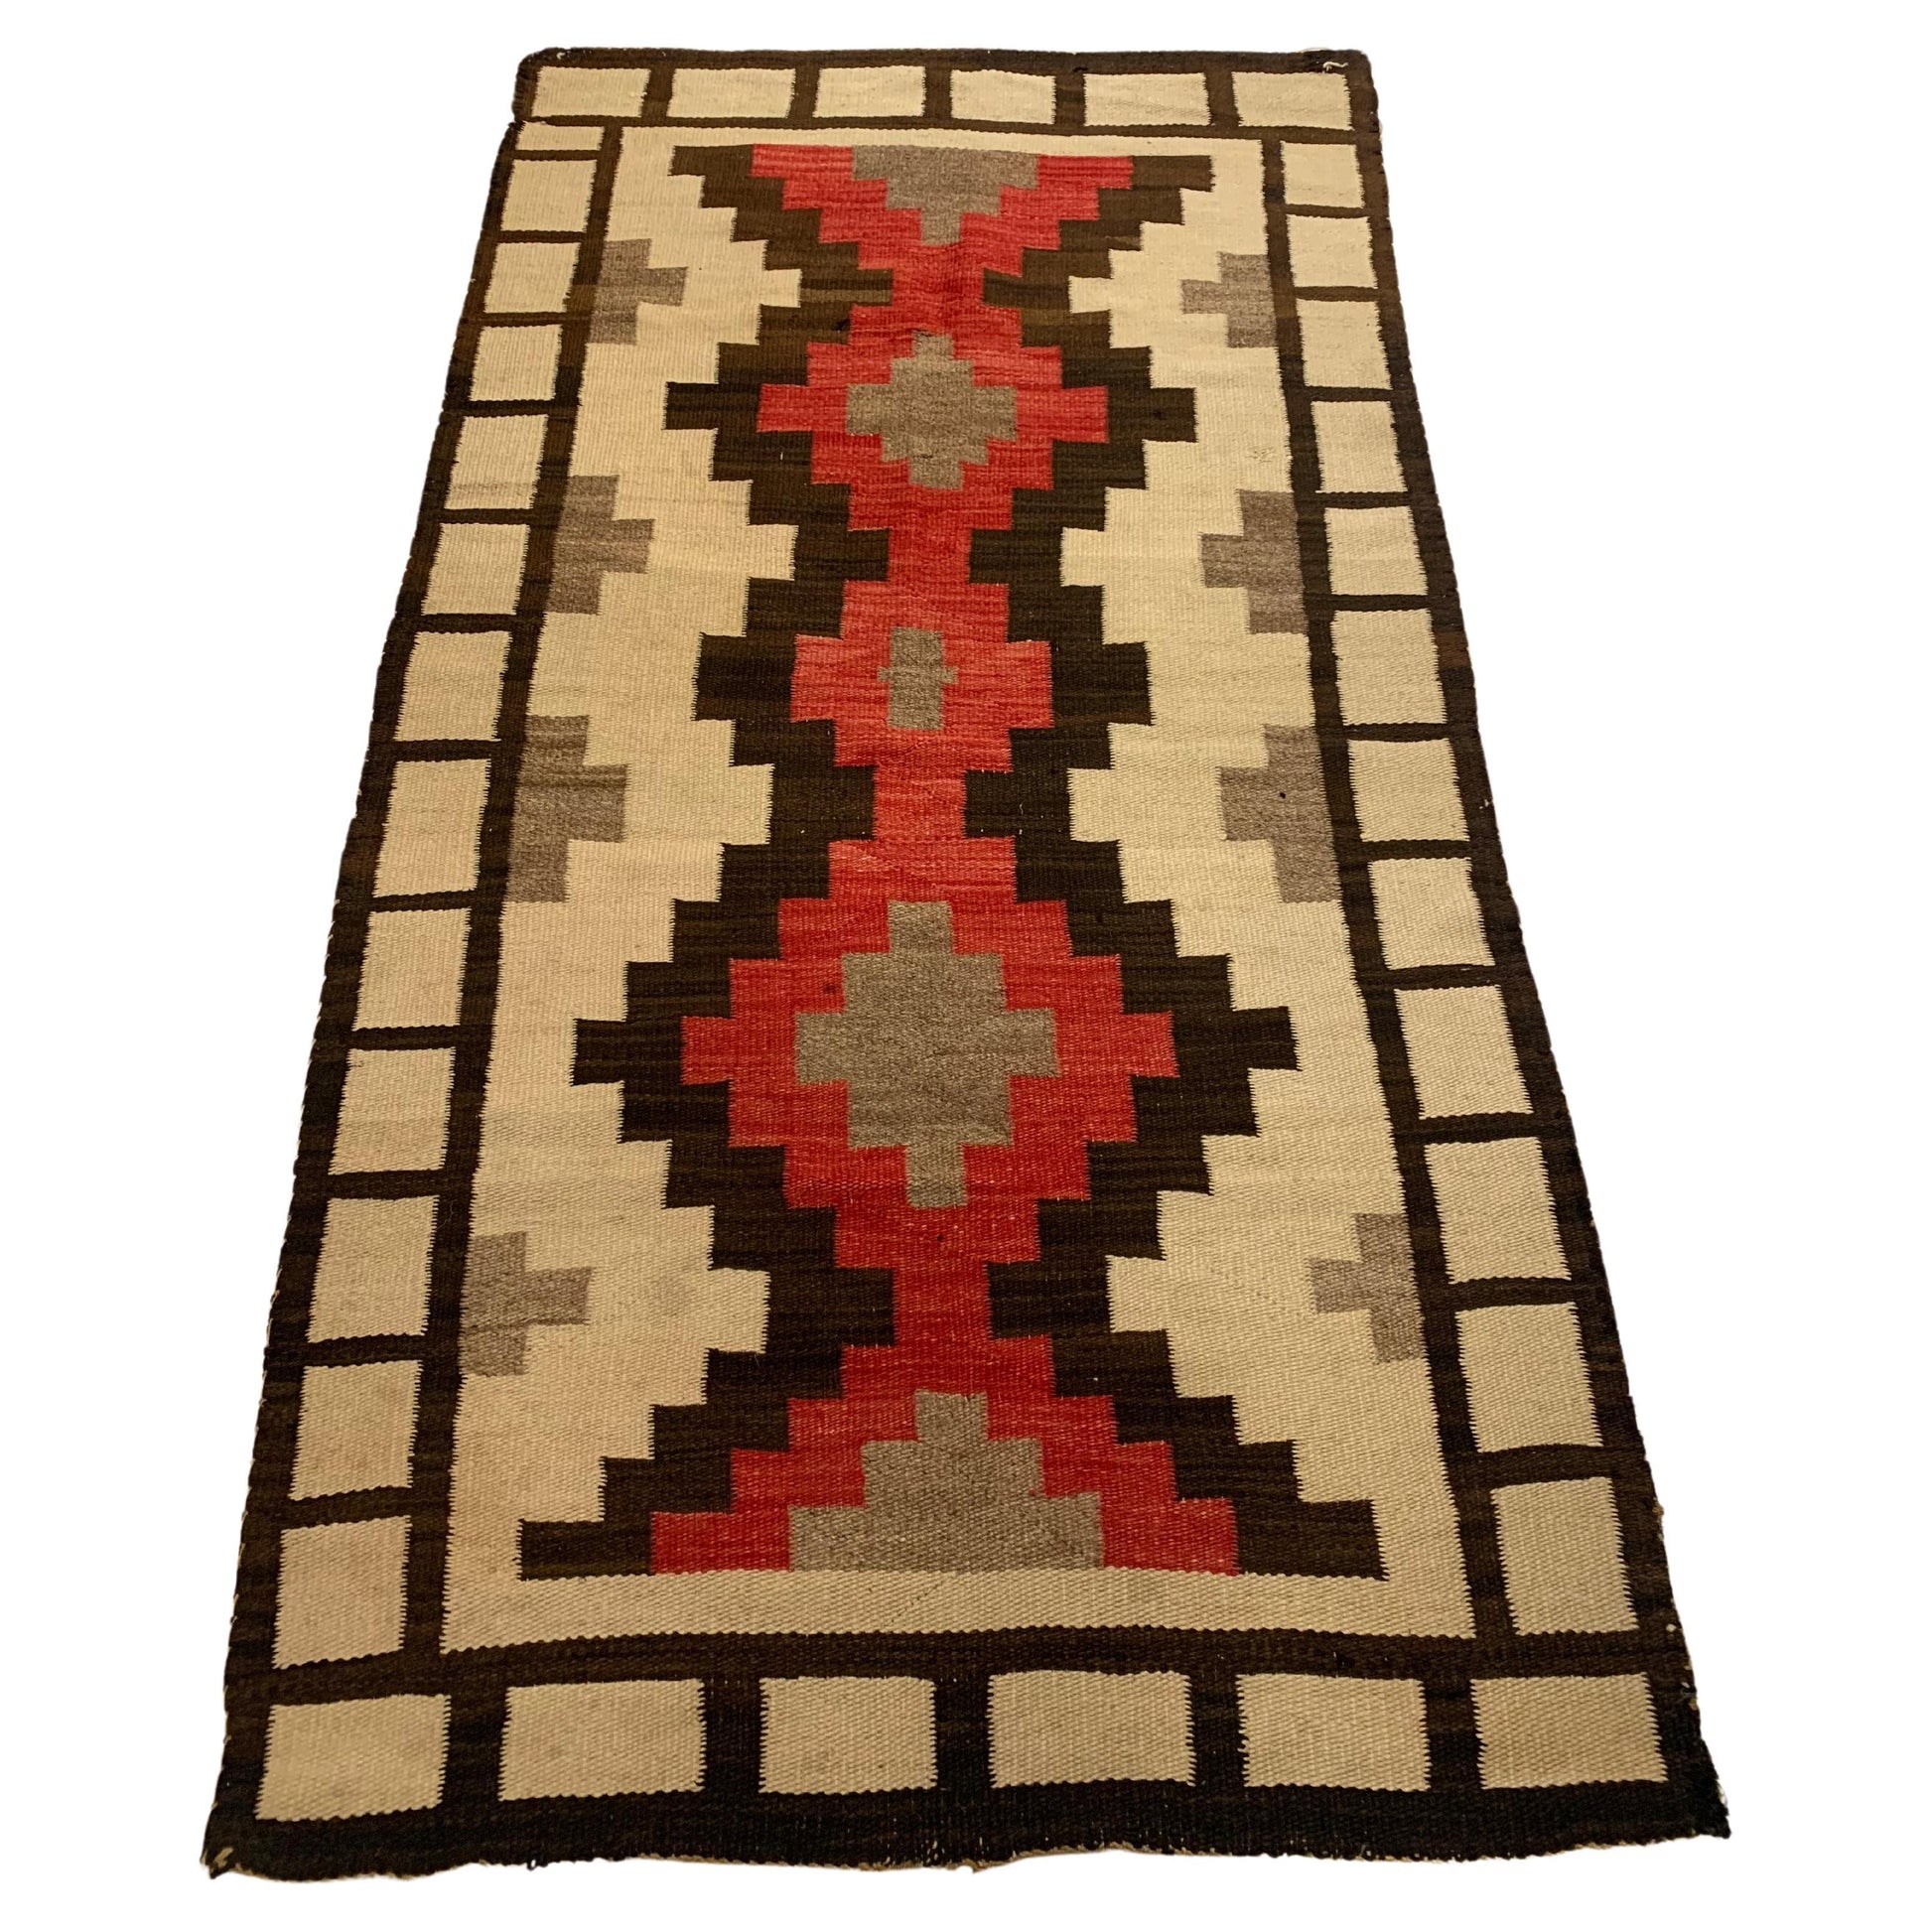 Handmade Antique Native American Navajo Rug showcased in a traditional living room setting